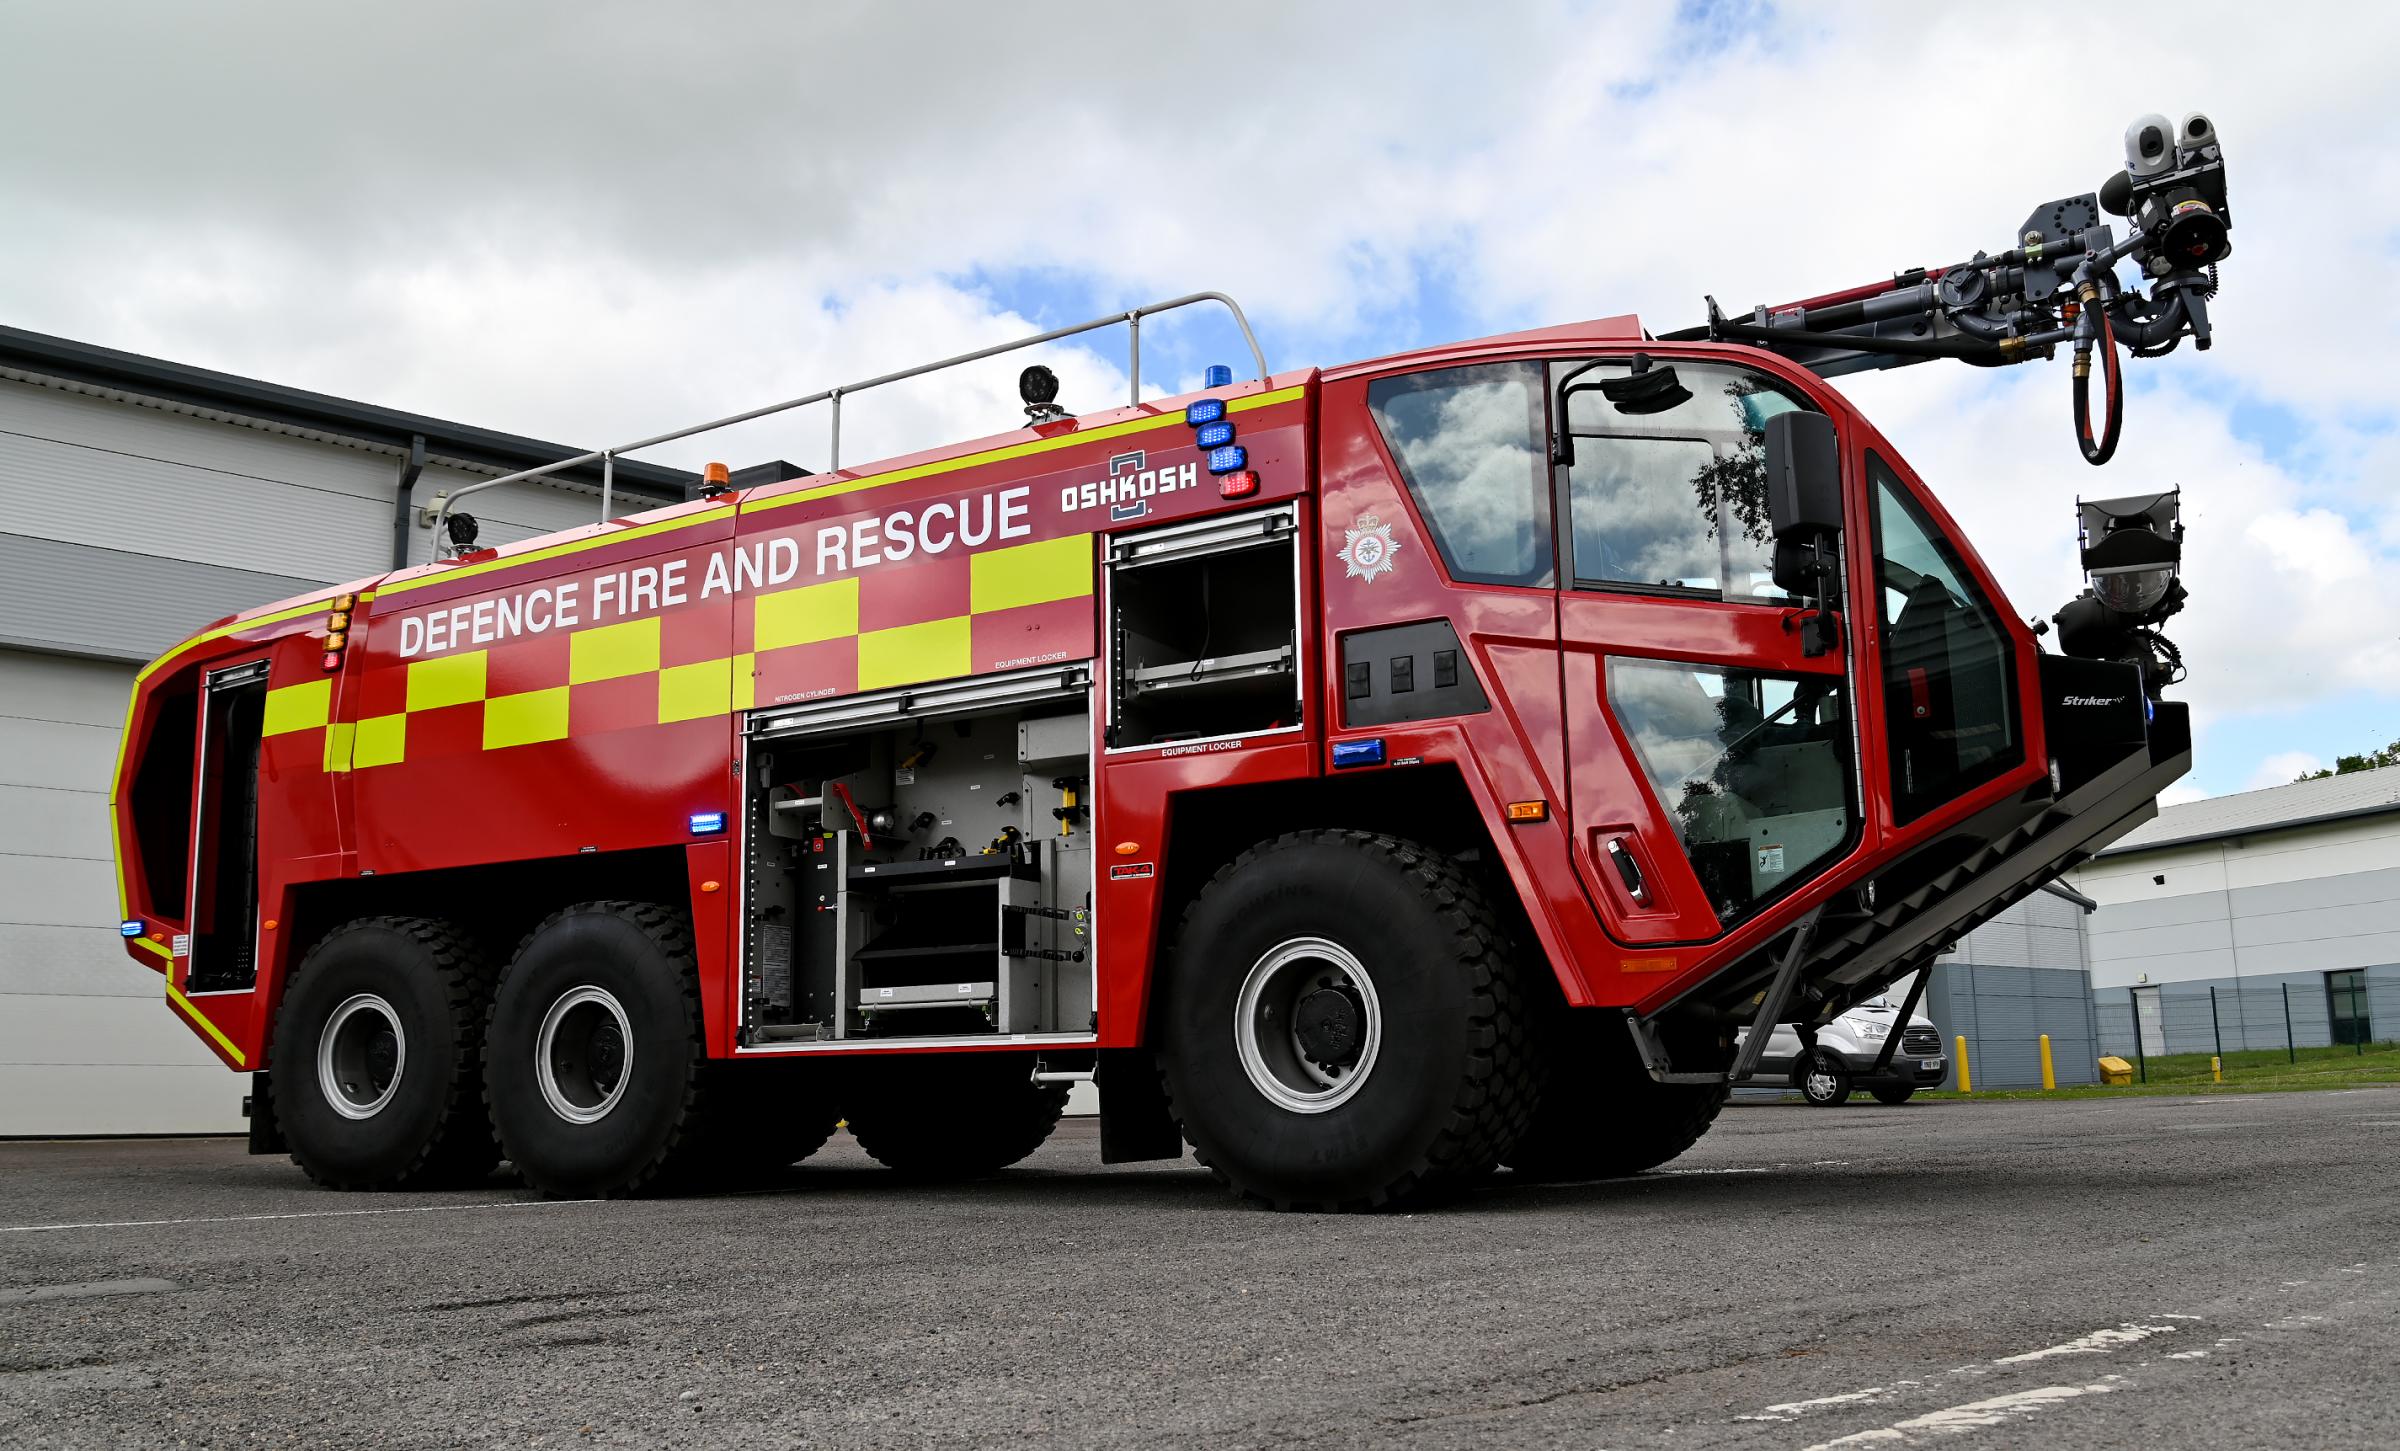 Capita is responsible for providing specialist firefighting services at defence sites across the UK